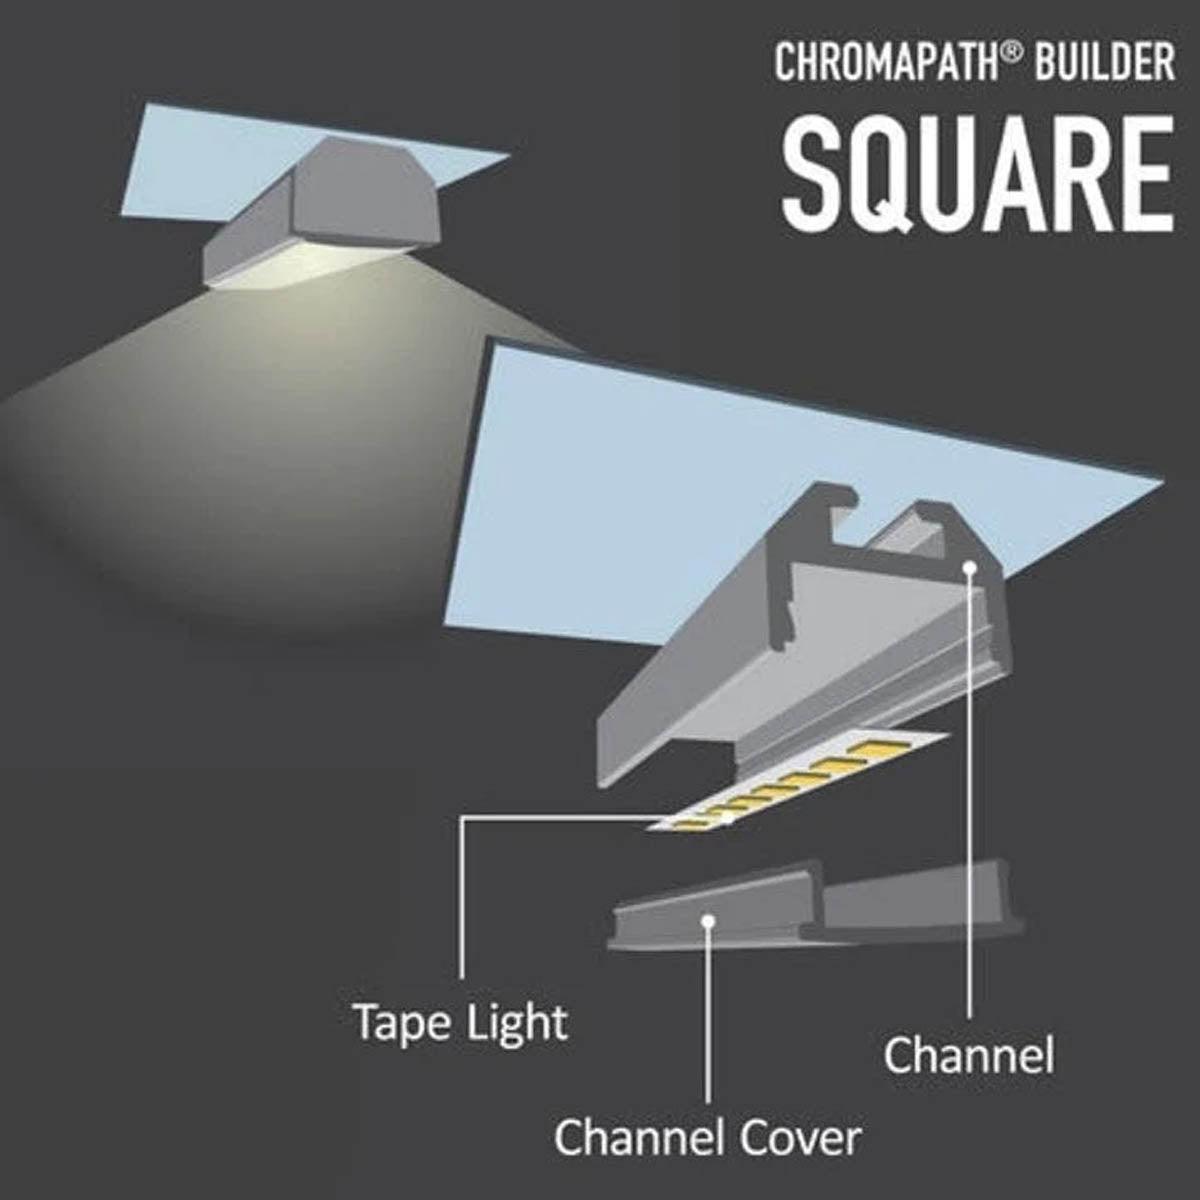 96in. Chromapath Builder, Square Black LED Channels for 12mm strip lights, Pack of 10